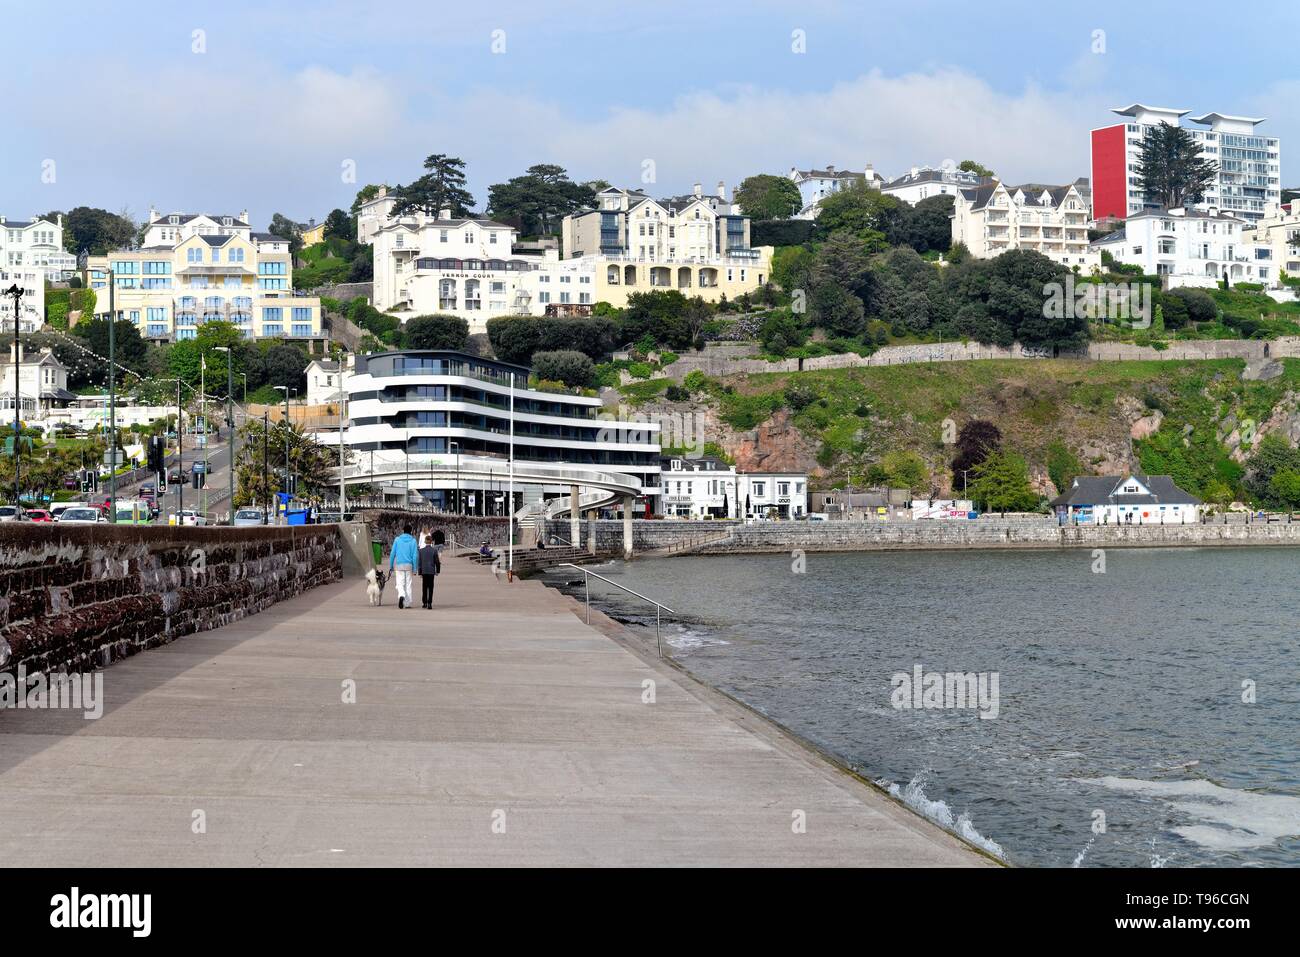 The esplanade on Torquay seafront with small hotels on hillside, Devon England UK Stock Photo